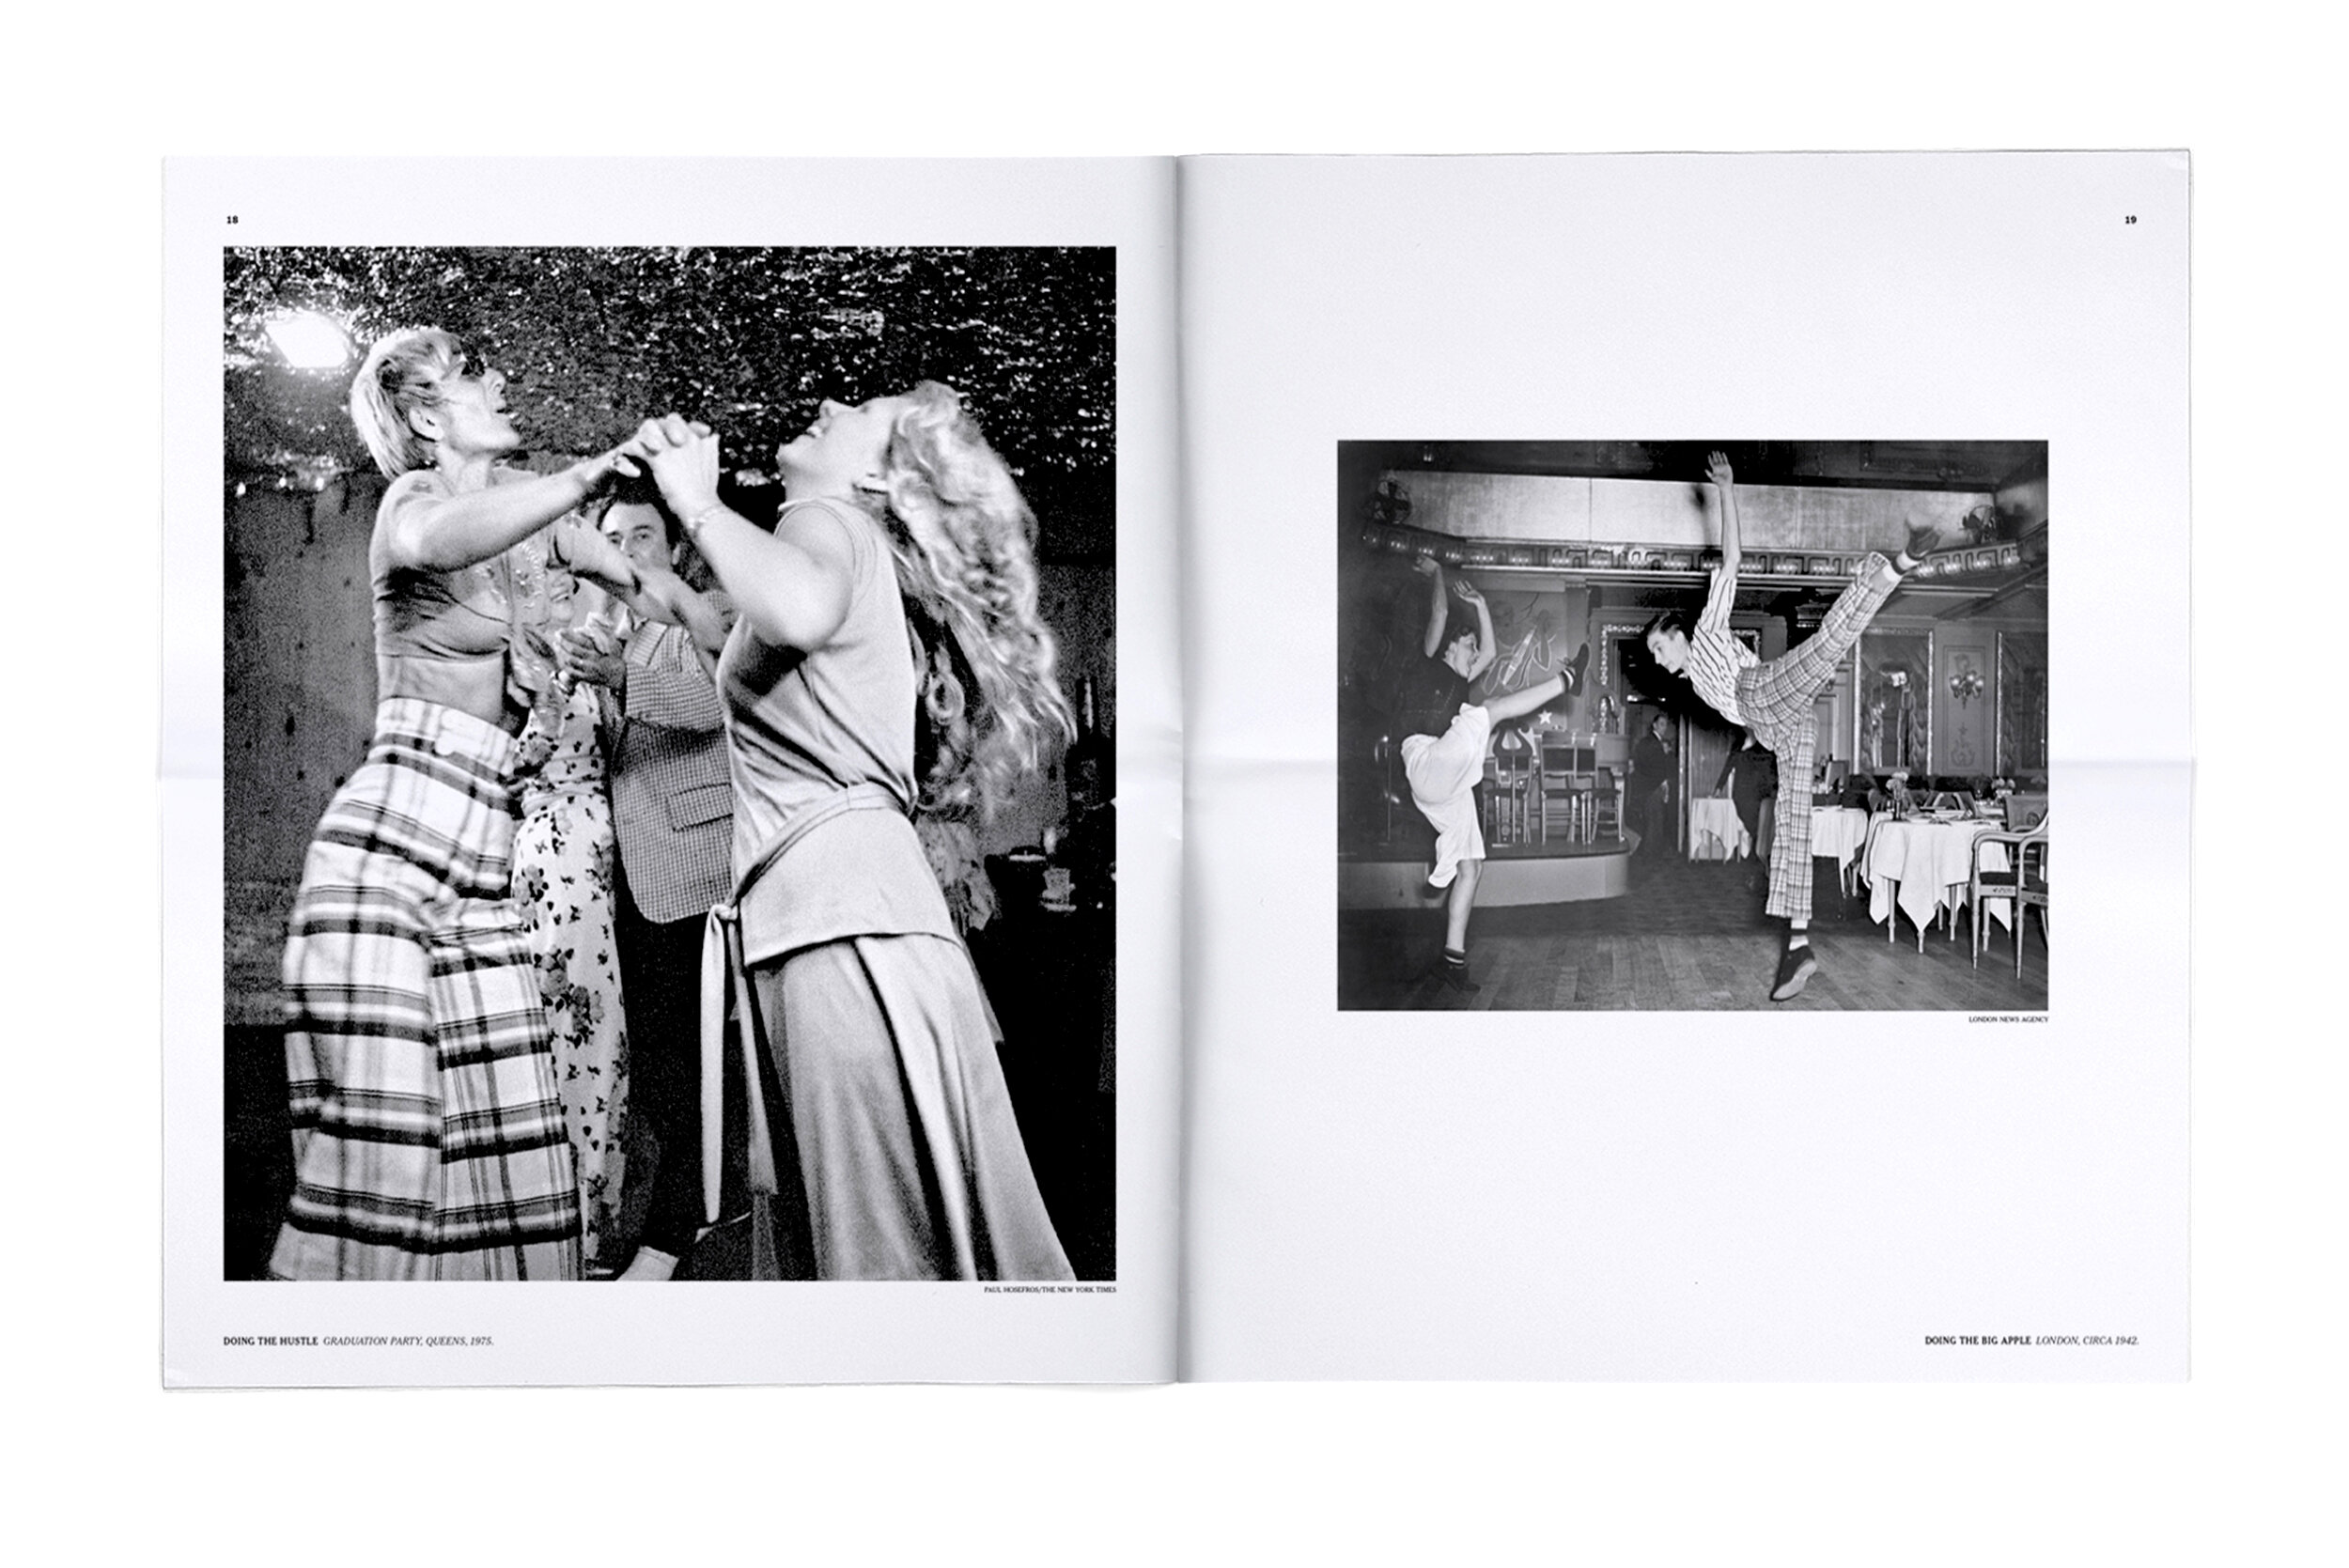   Dance from The New York Times archive . Photographs by Paul Hosefros and London News Agency. 